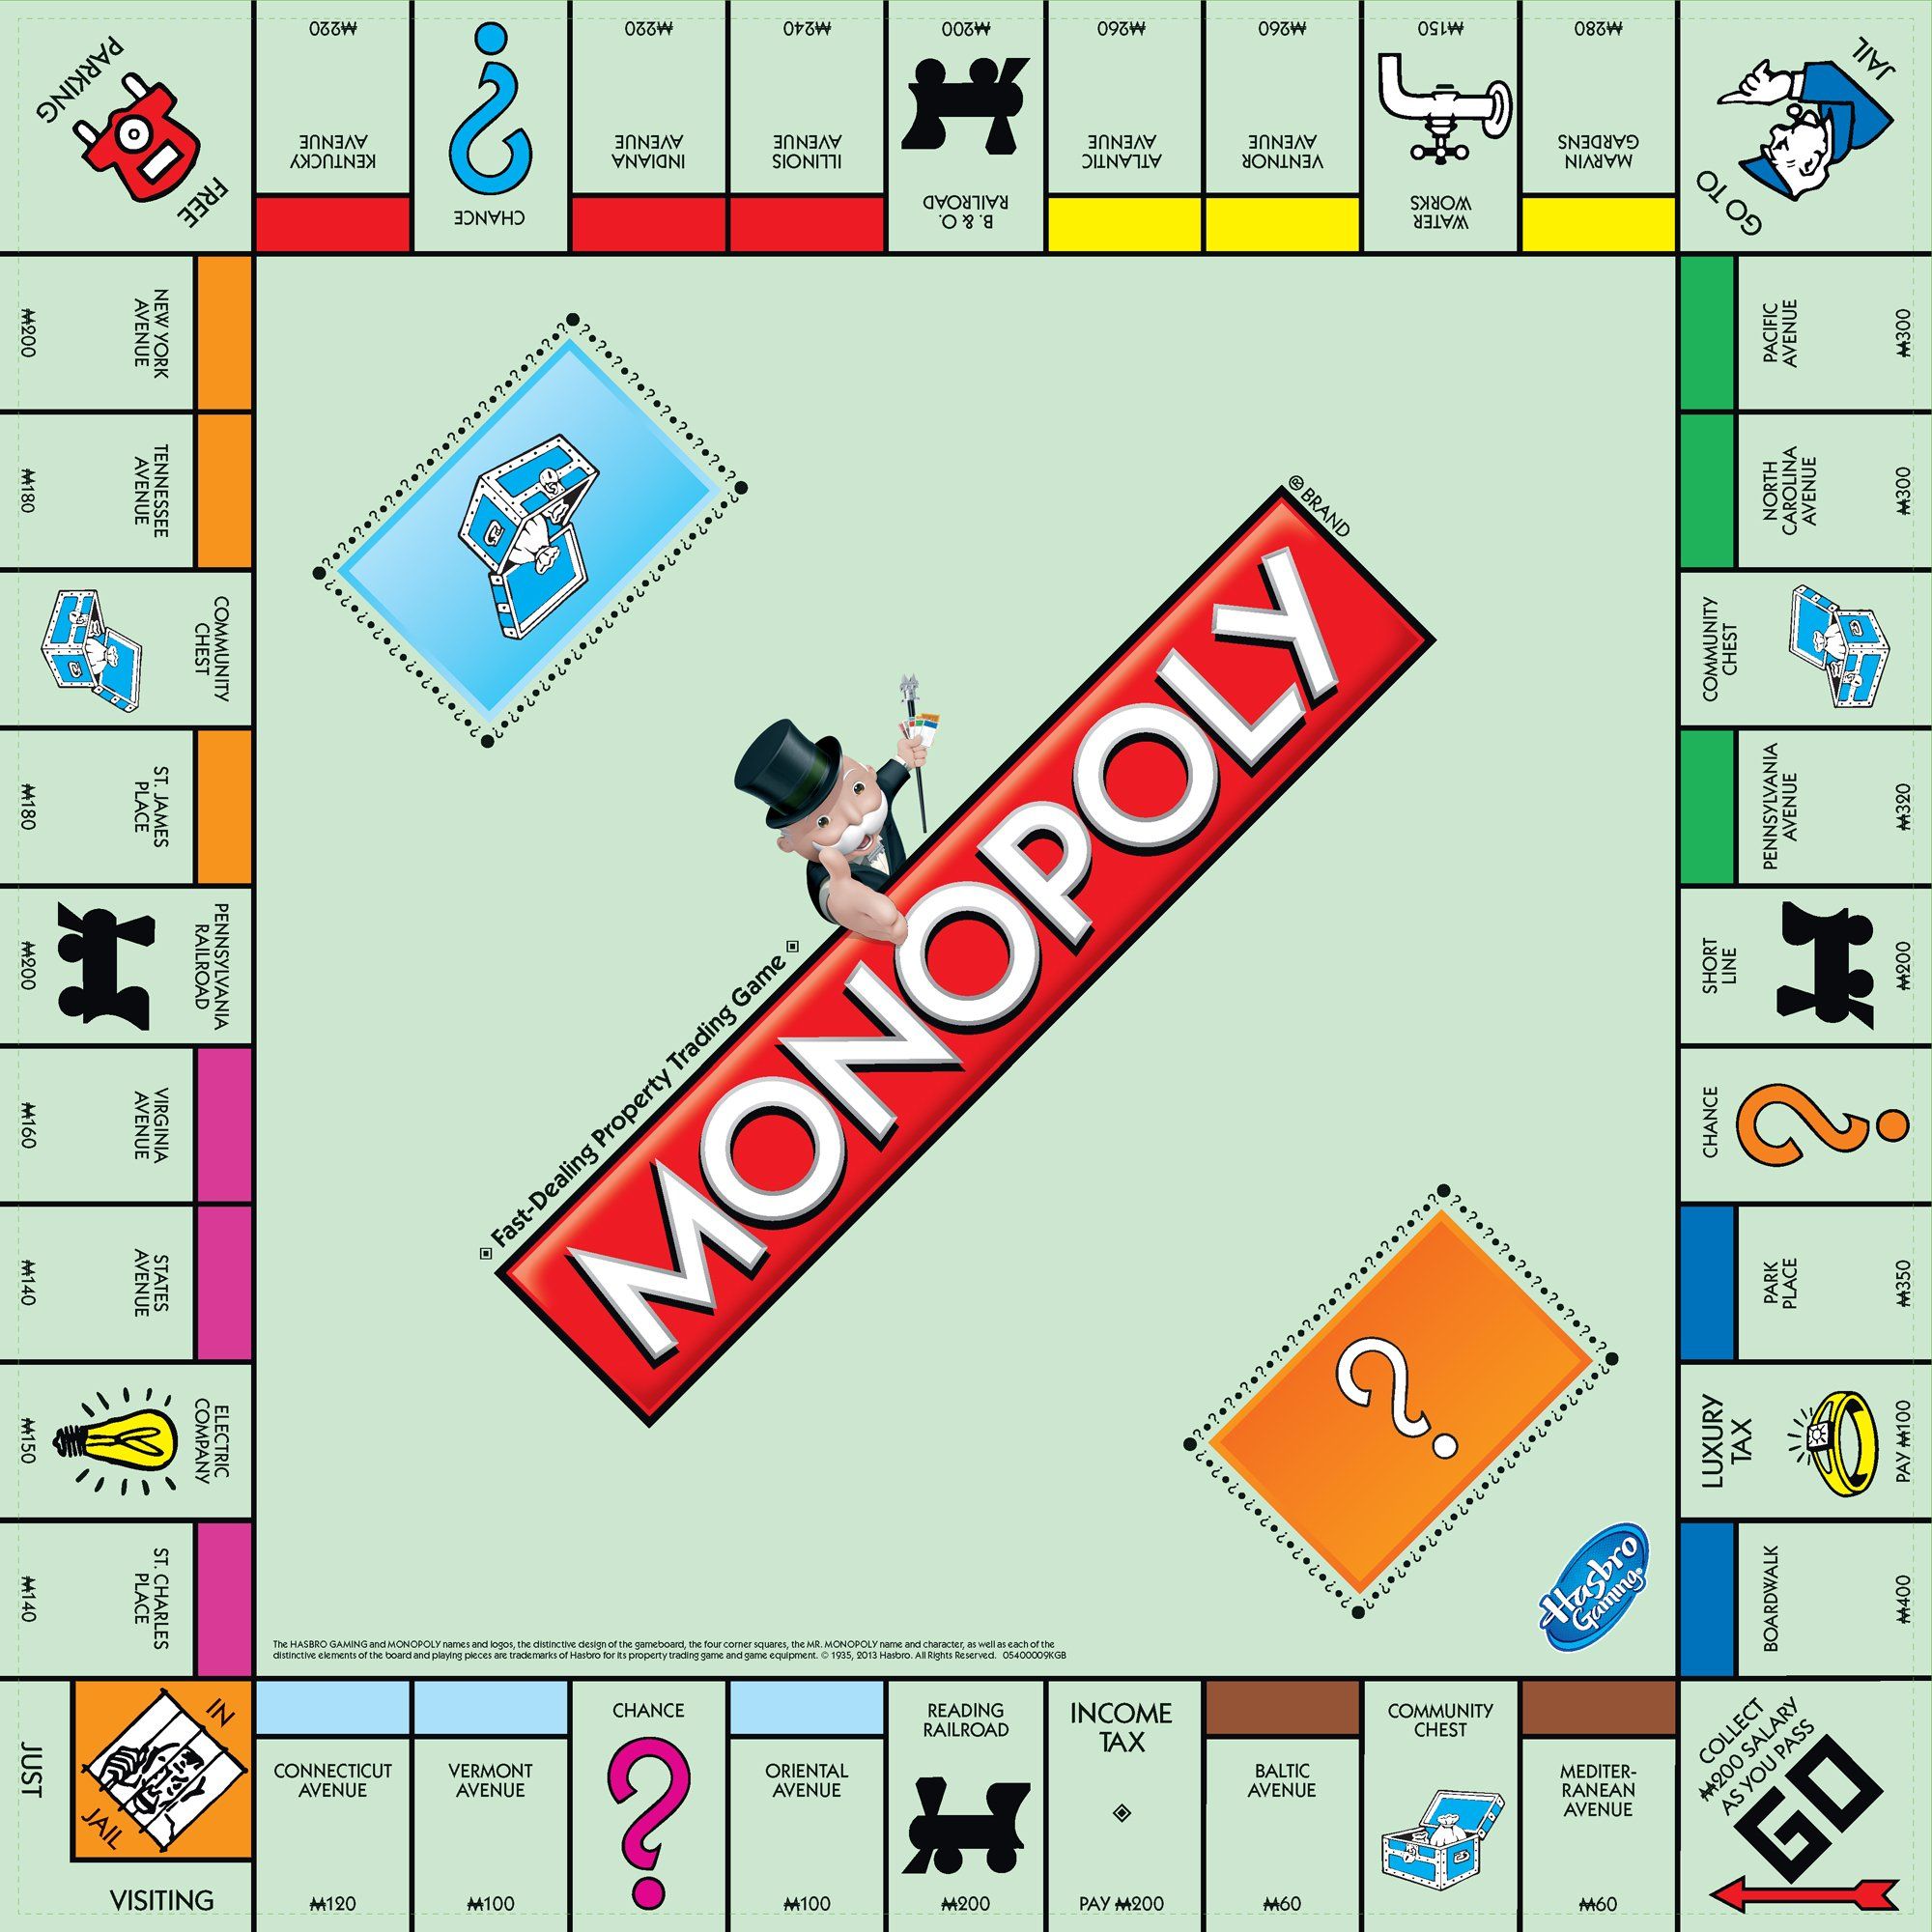 Monopoly is one of the best legacy board games